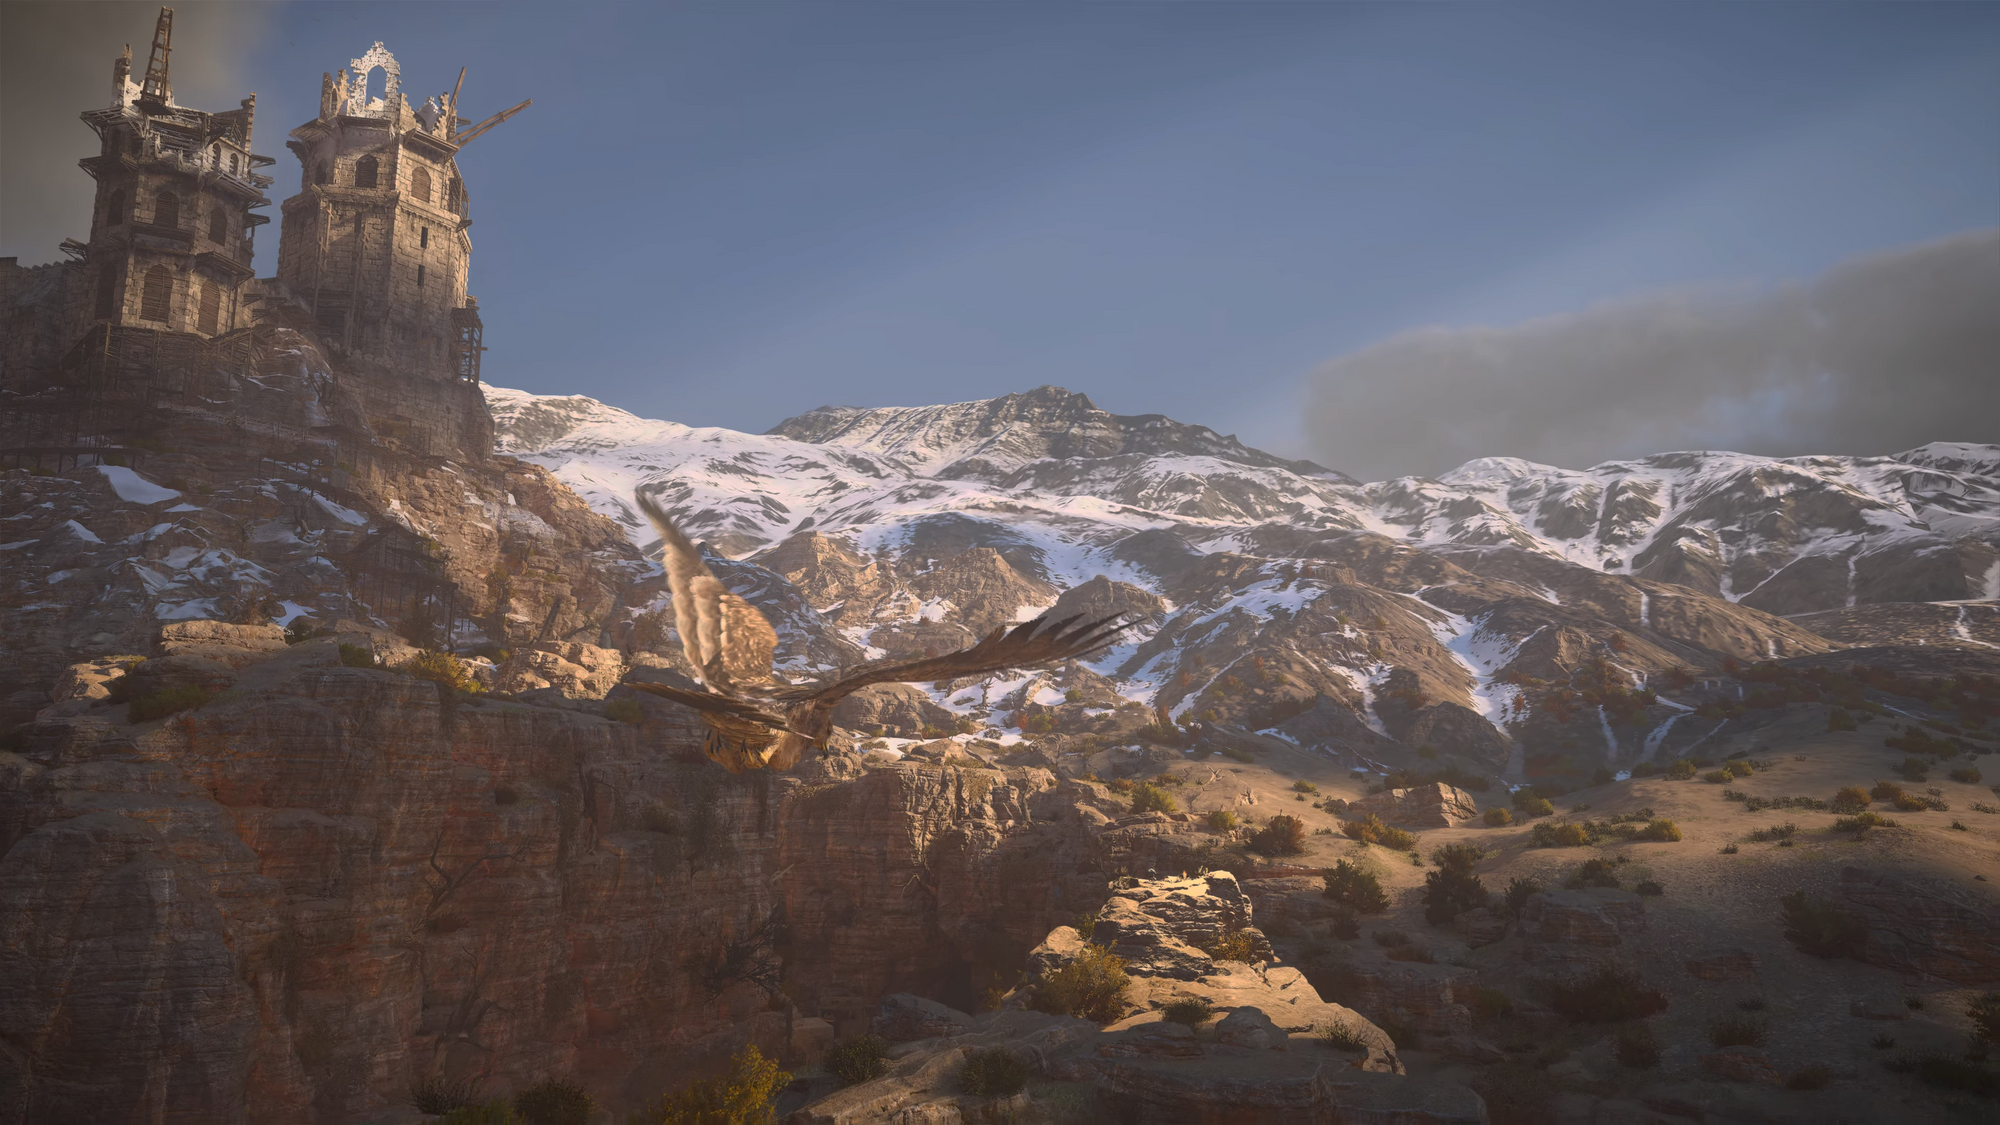 A hawk is seen swooping over a valley bordered by white-capped mountains. To the left a crumbling masonry temple or fortress stands towering above on a bluff.